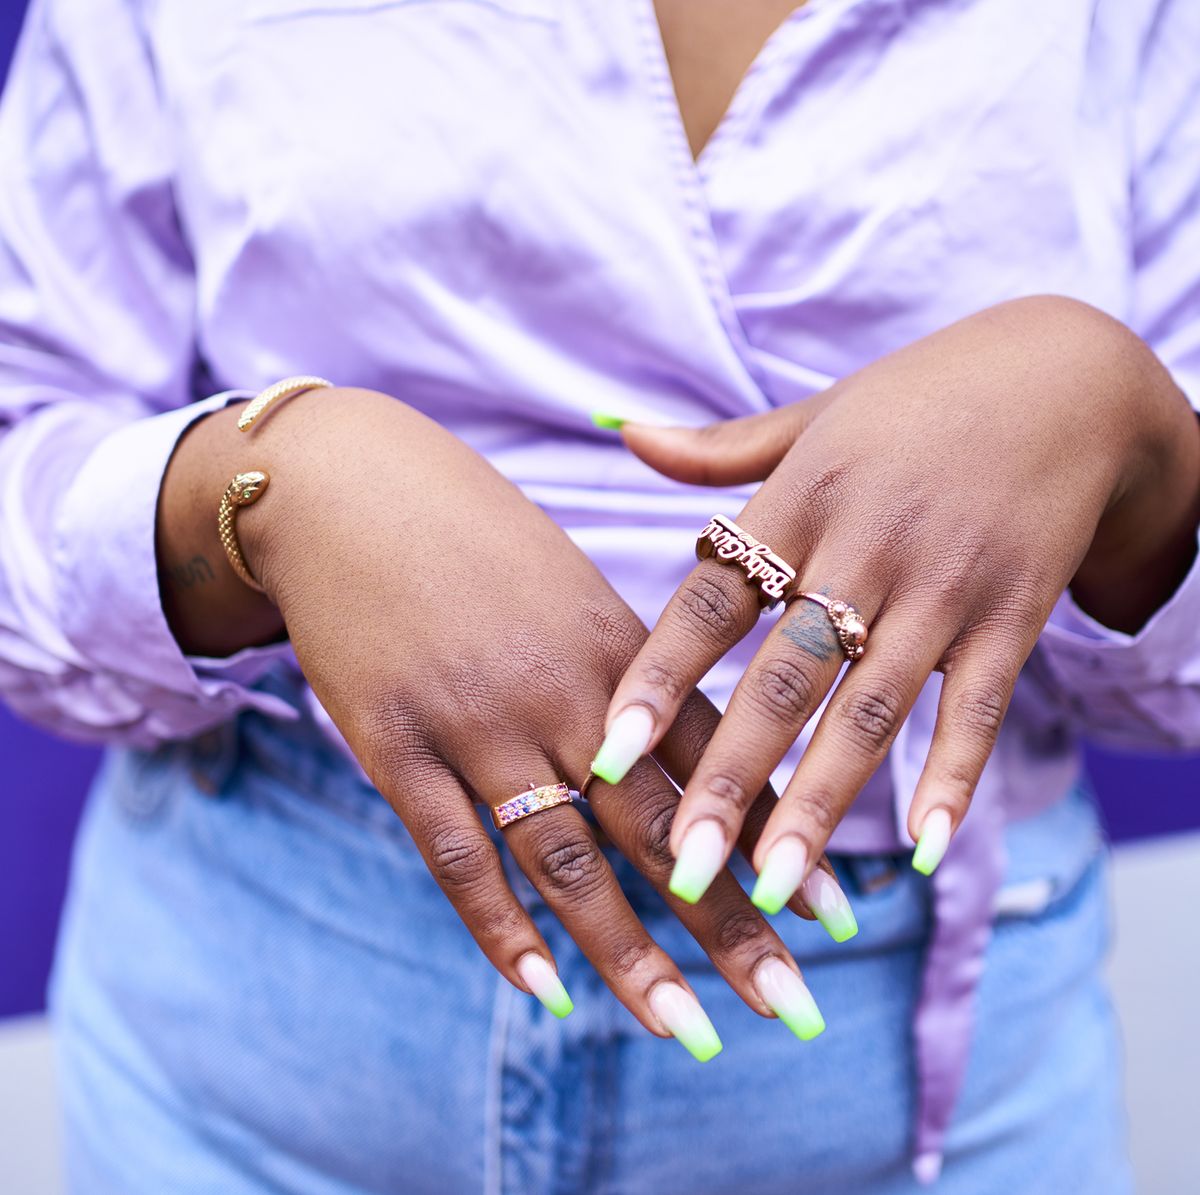 14 Best Press-On Nails To Shop In 2023: Kiss, Chillhouse, More